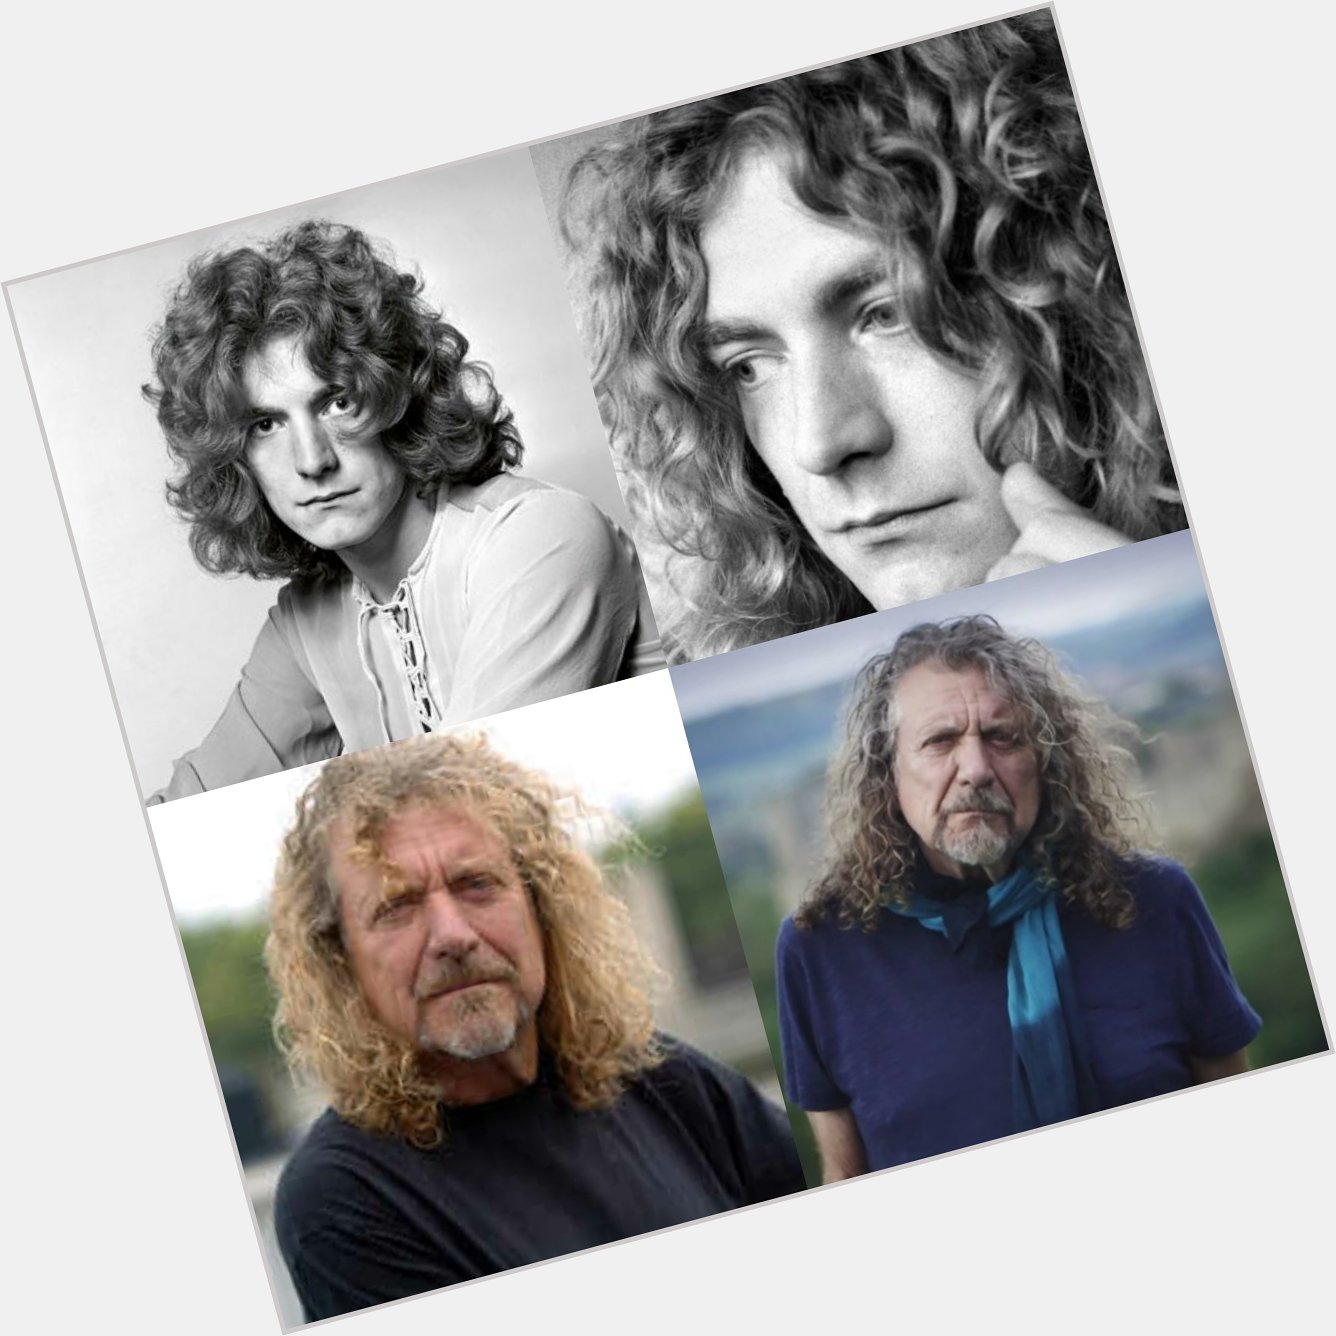 Happy Birthday to
Robert Plant of 
Led Zeppelin
He\s 71 today!
Favorite songs?? 